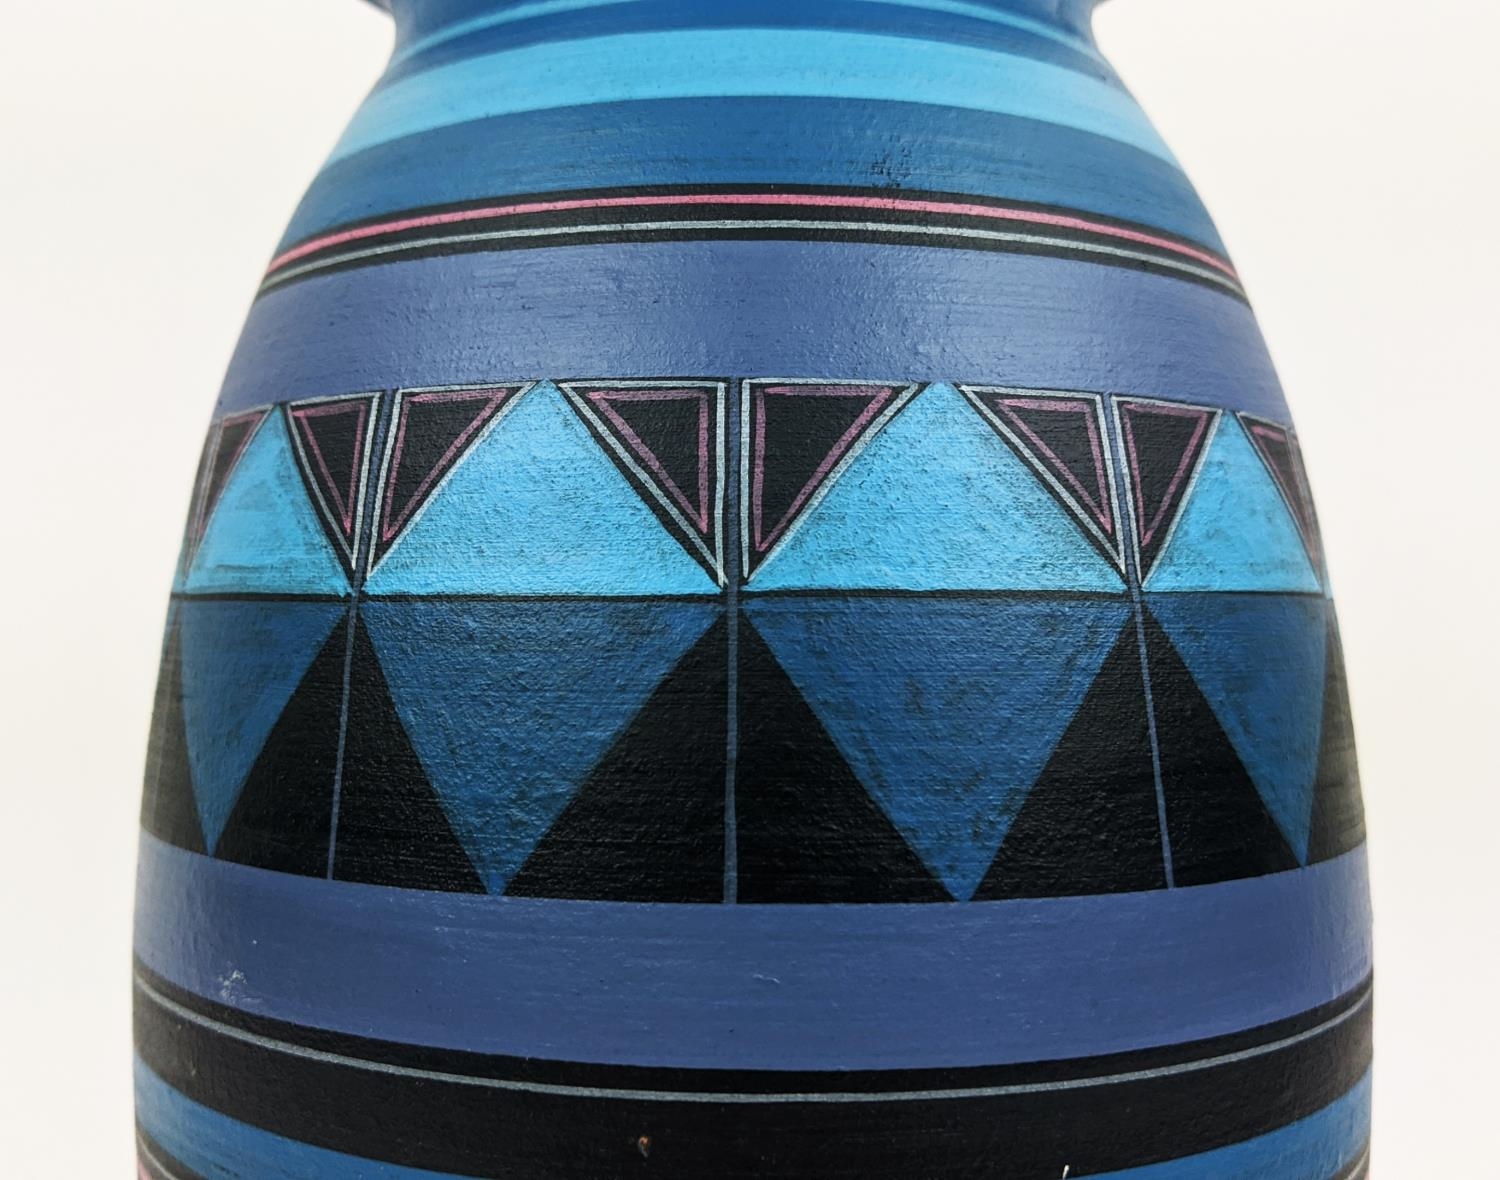 A PORTUGESE STUDIO POTTERY VASE, late 20th Century, hand painted in a geometric design, terracotta - Image 4 of 7